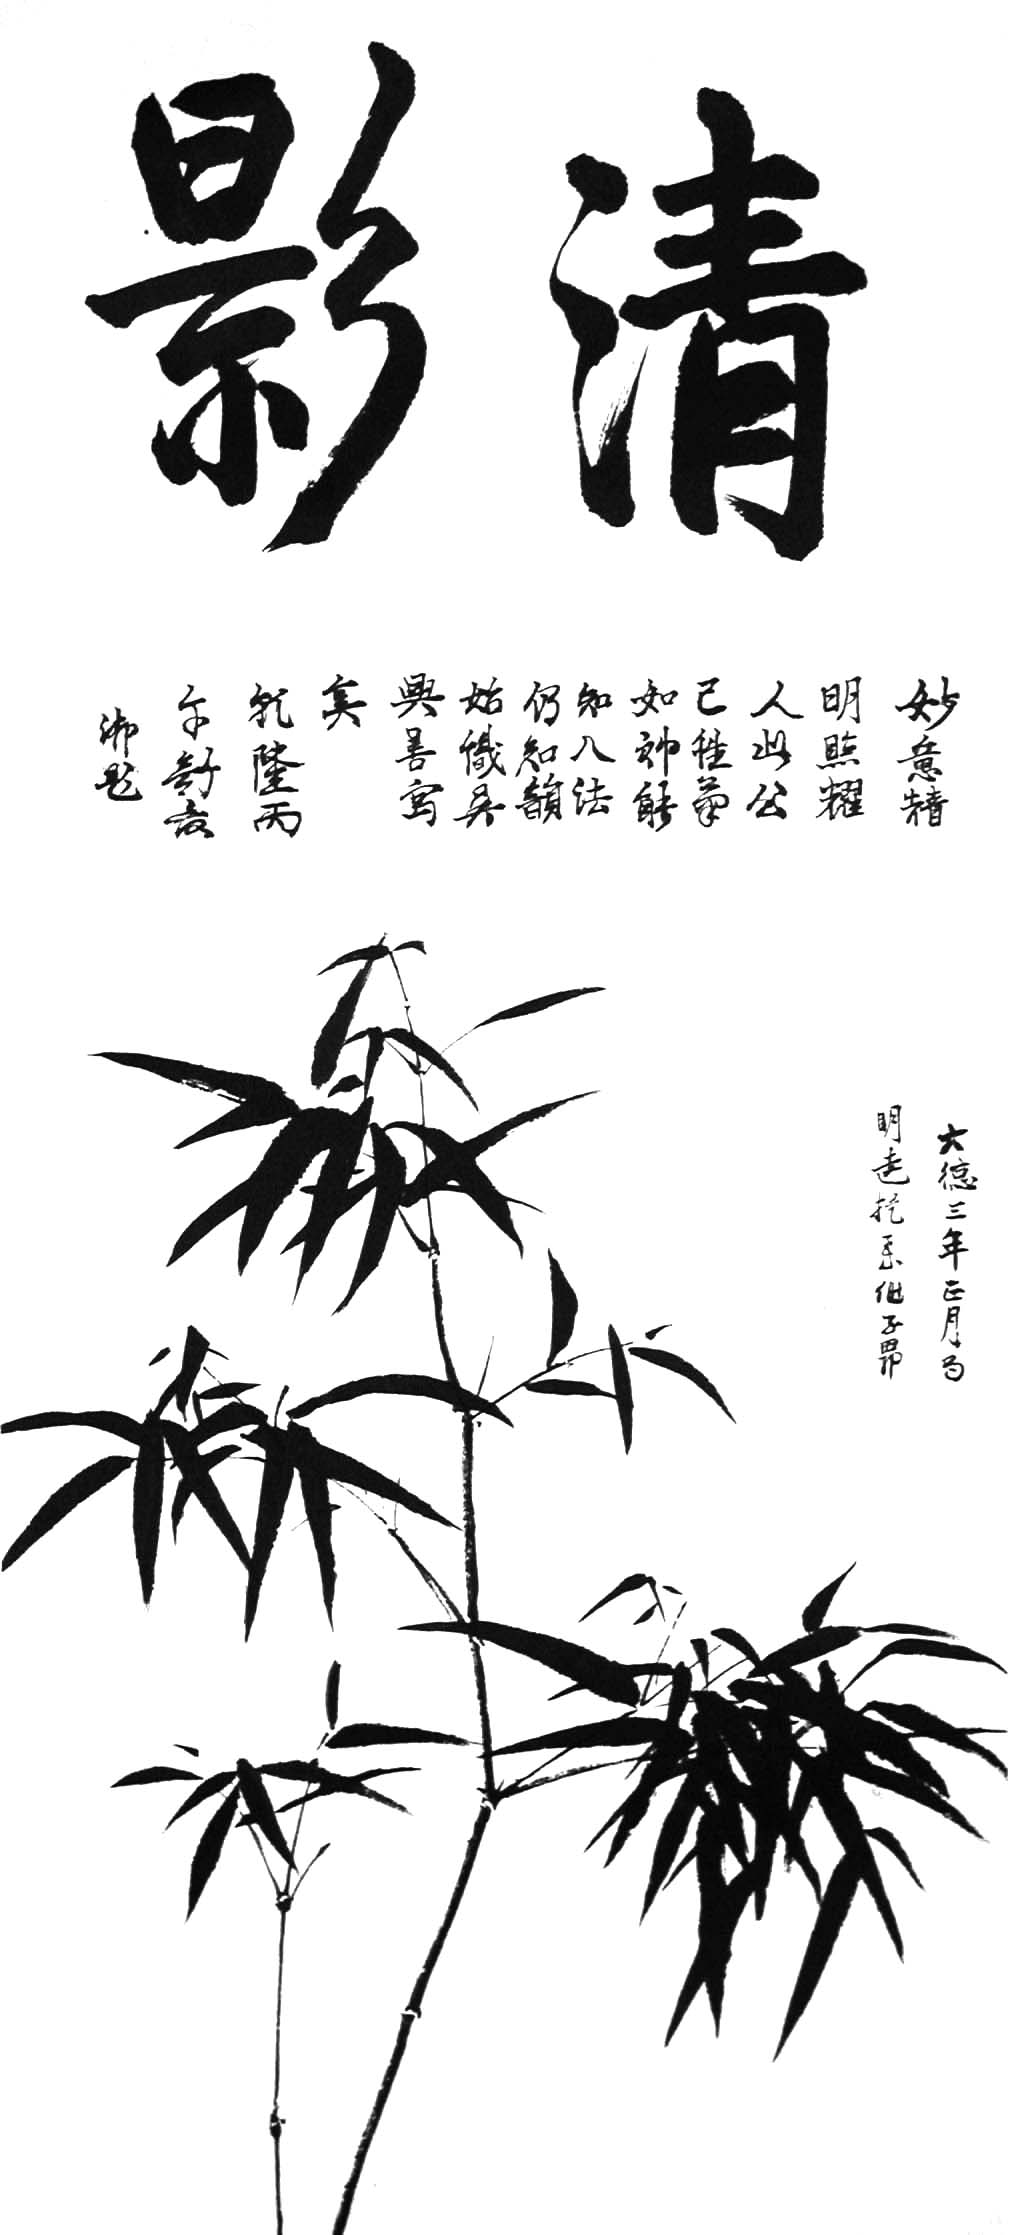 Bamboo and Calligraphy